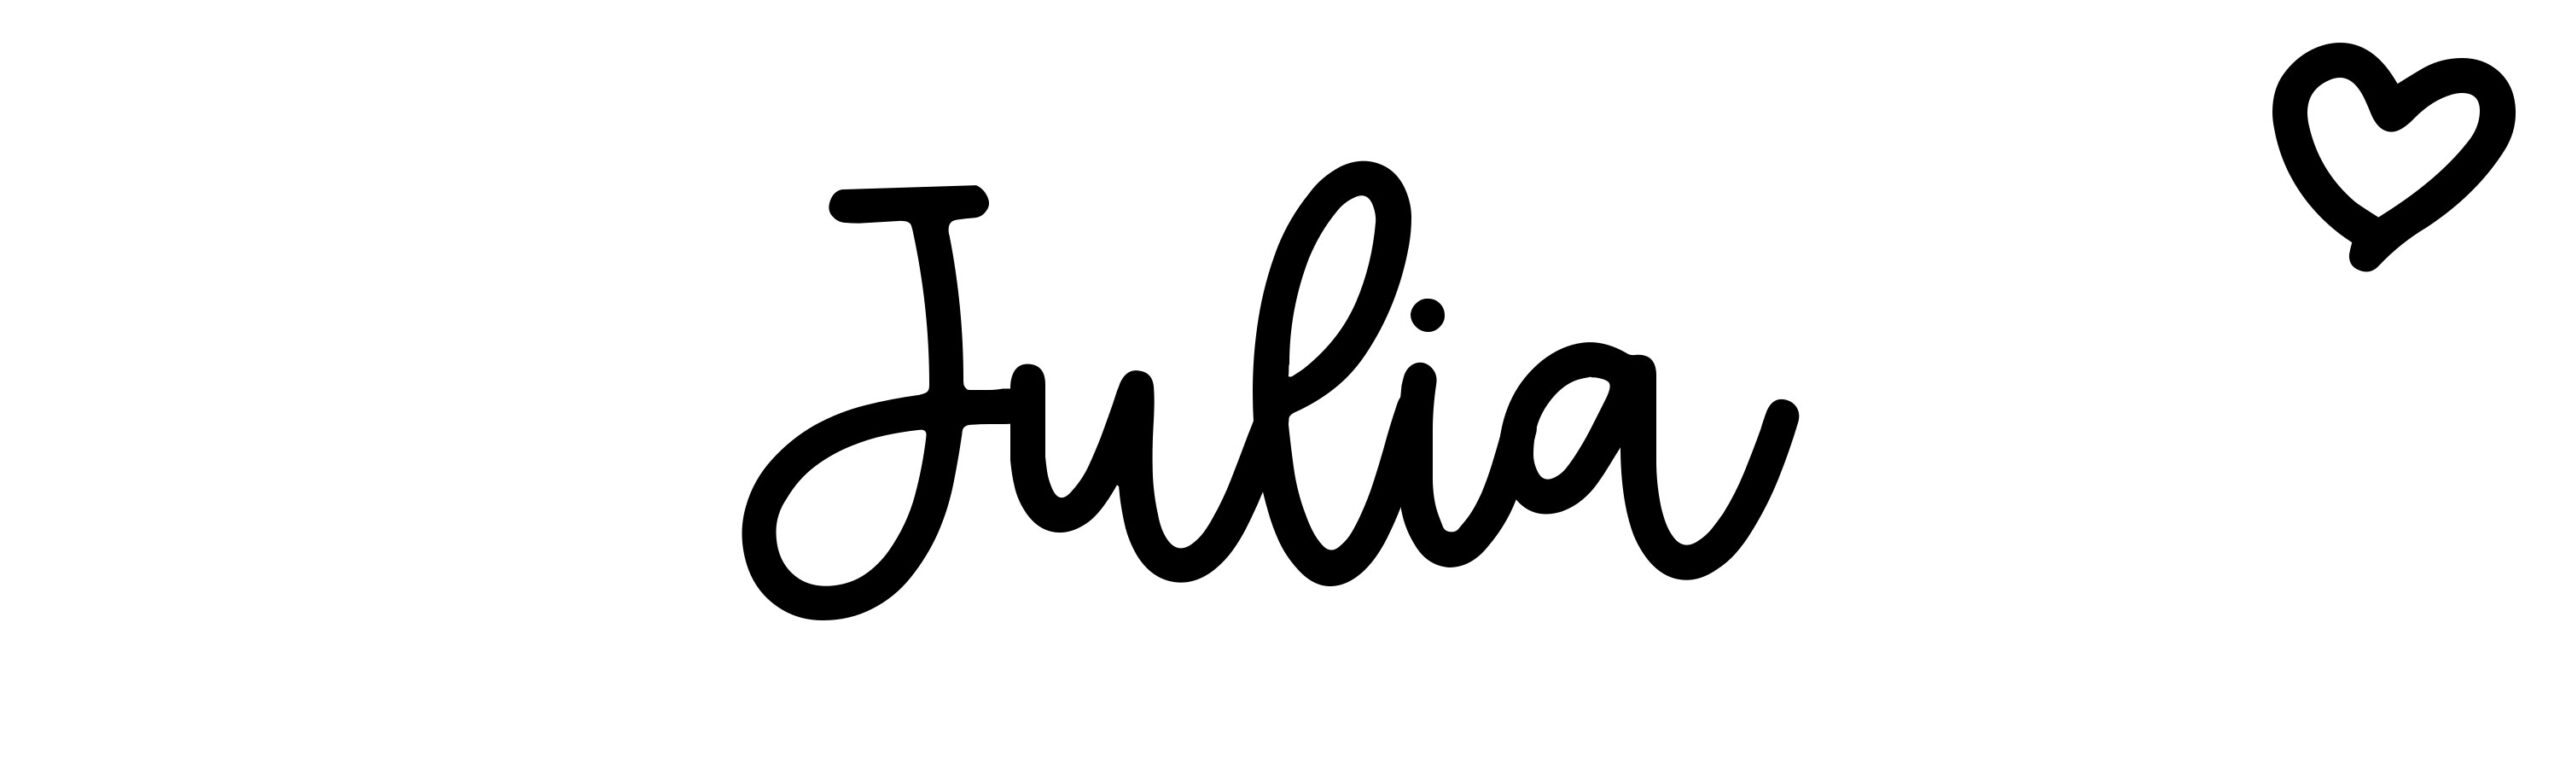 Julia - Name meaning, origin, variations and more